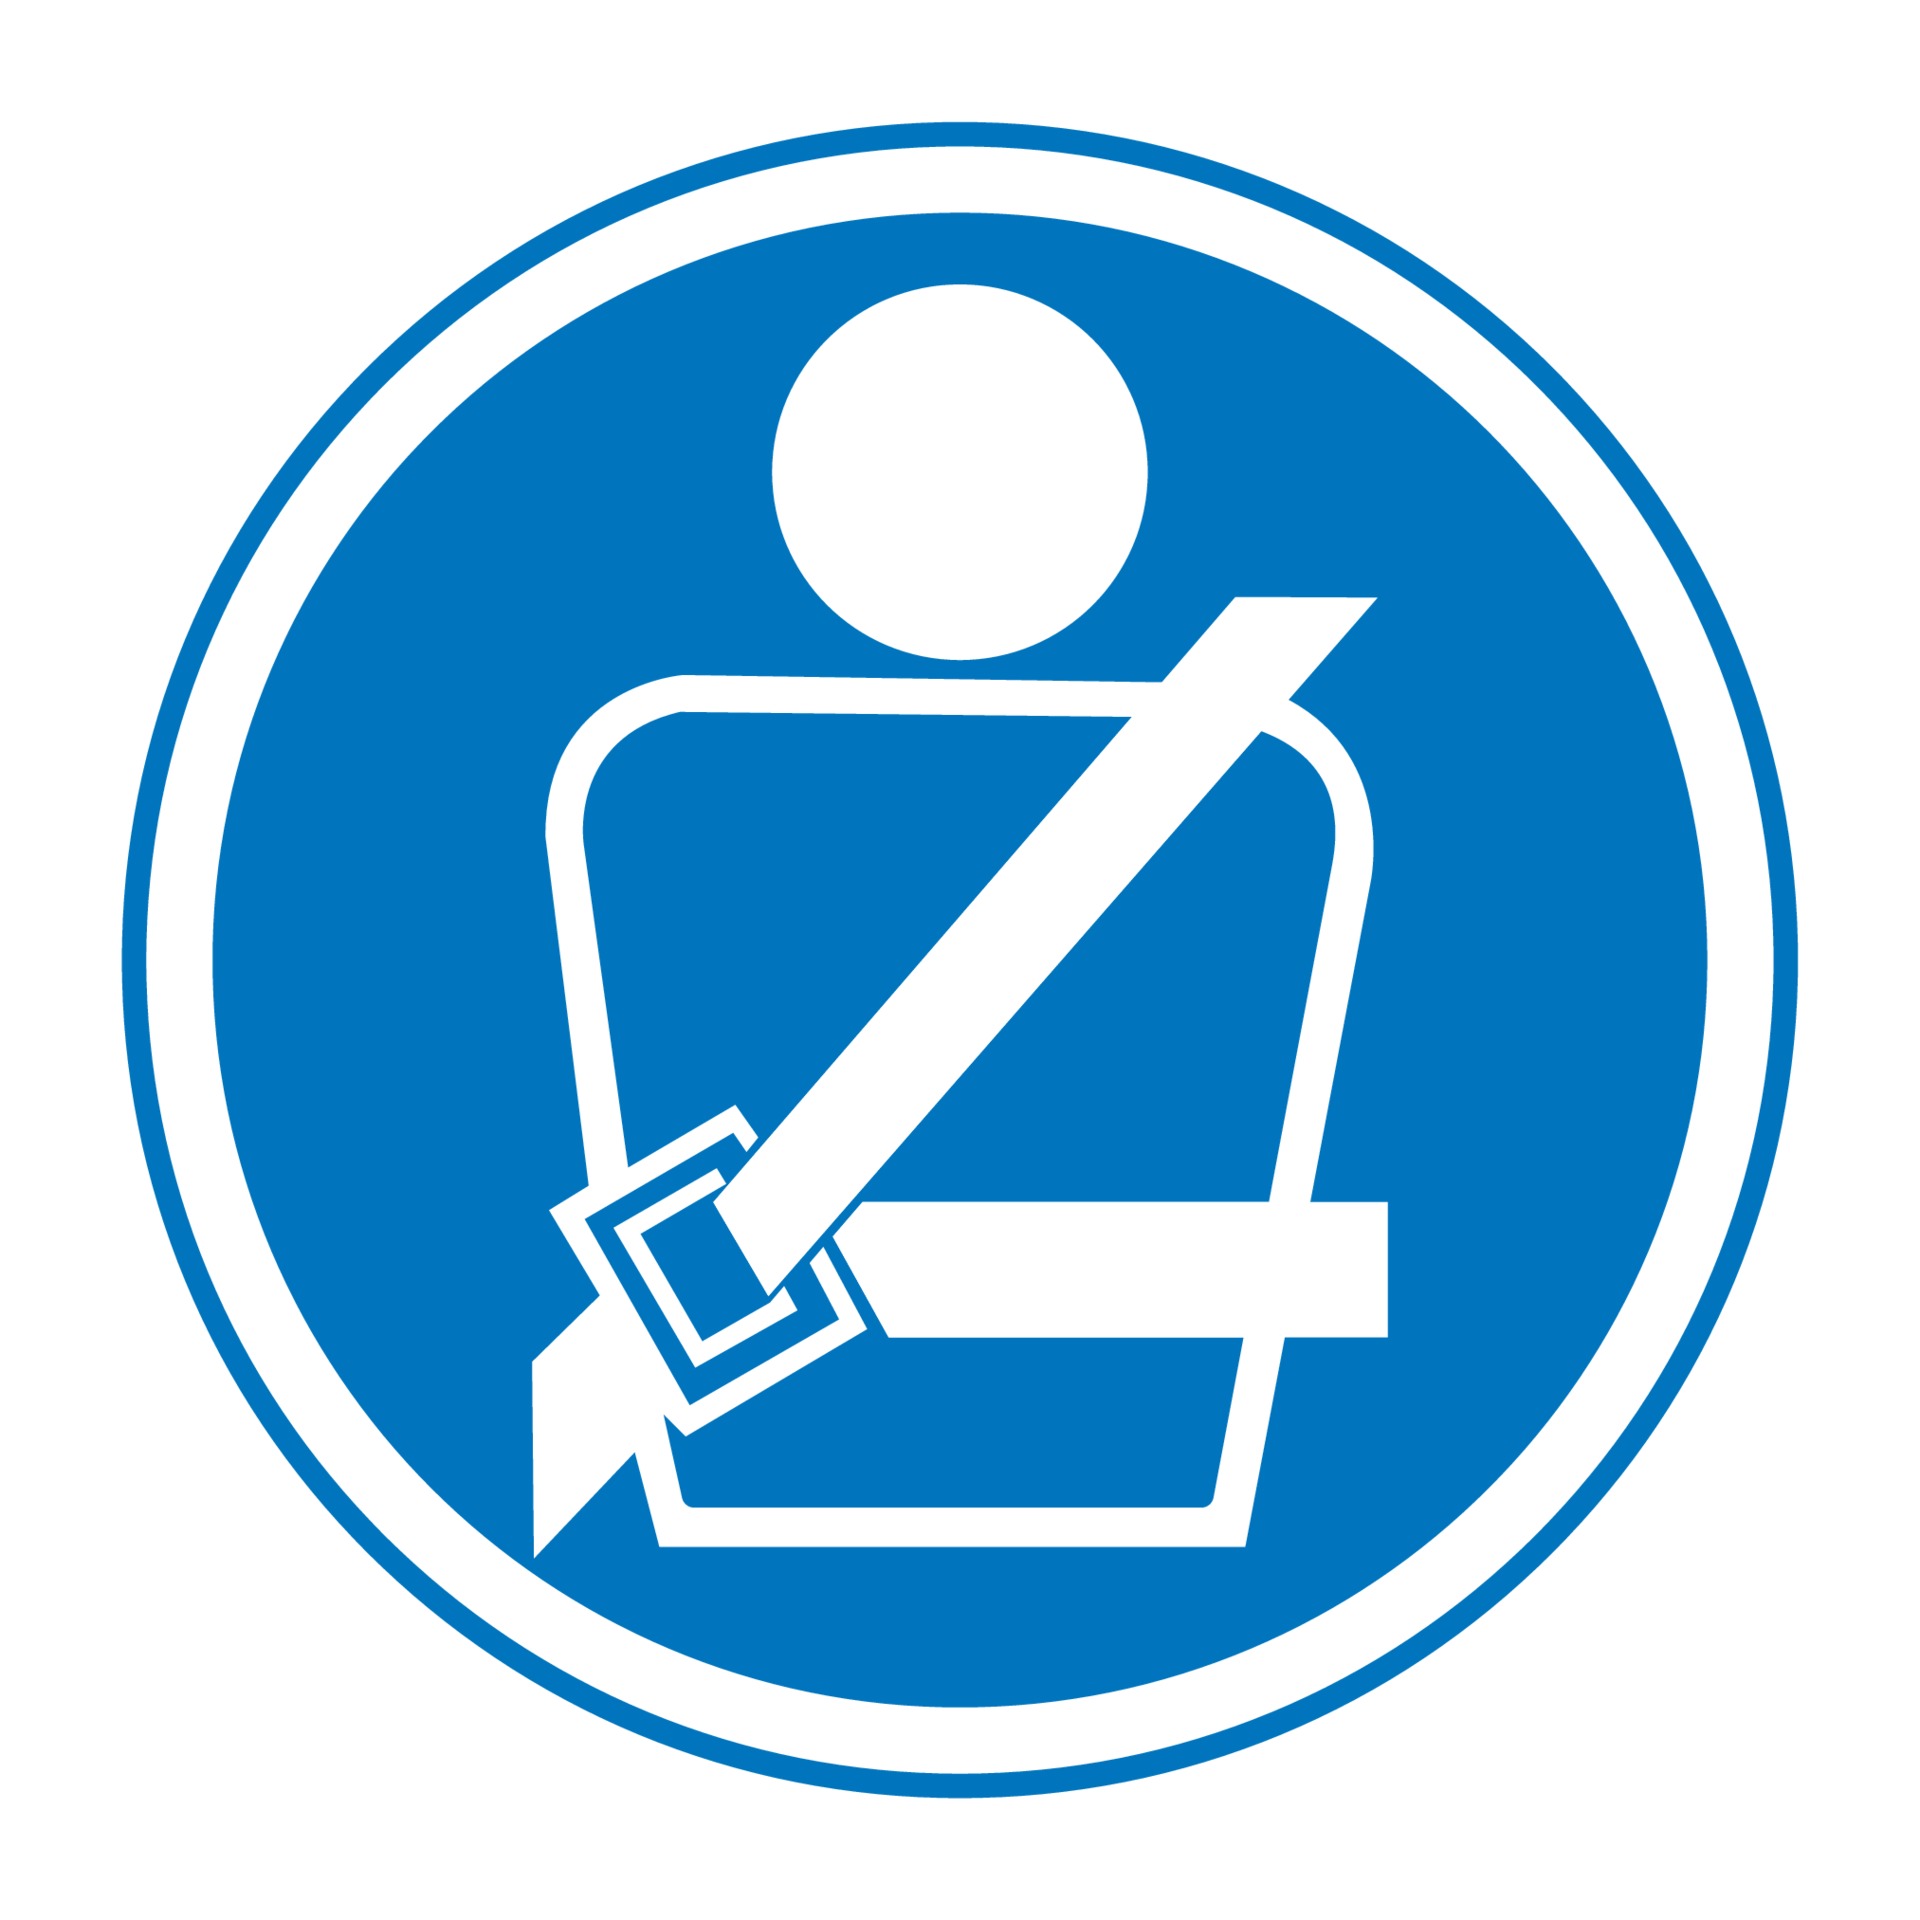 How To Draw Wear Seat Belt Road Safety Poster Youtube